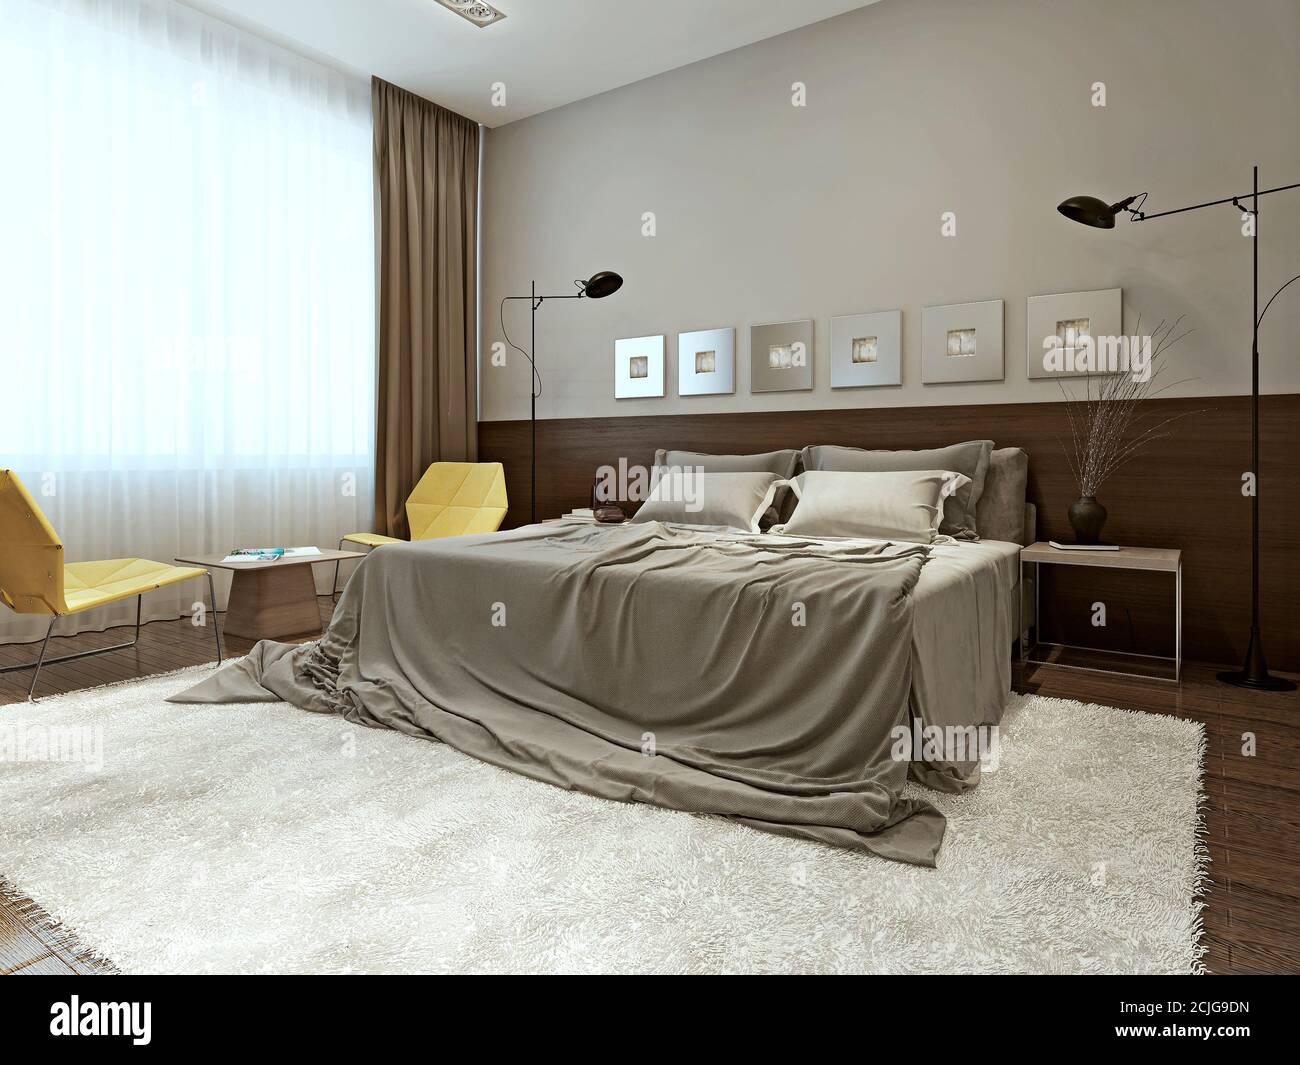 Bedroom High Tech Style 3d Images Stock Photo Alamy